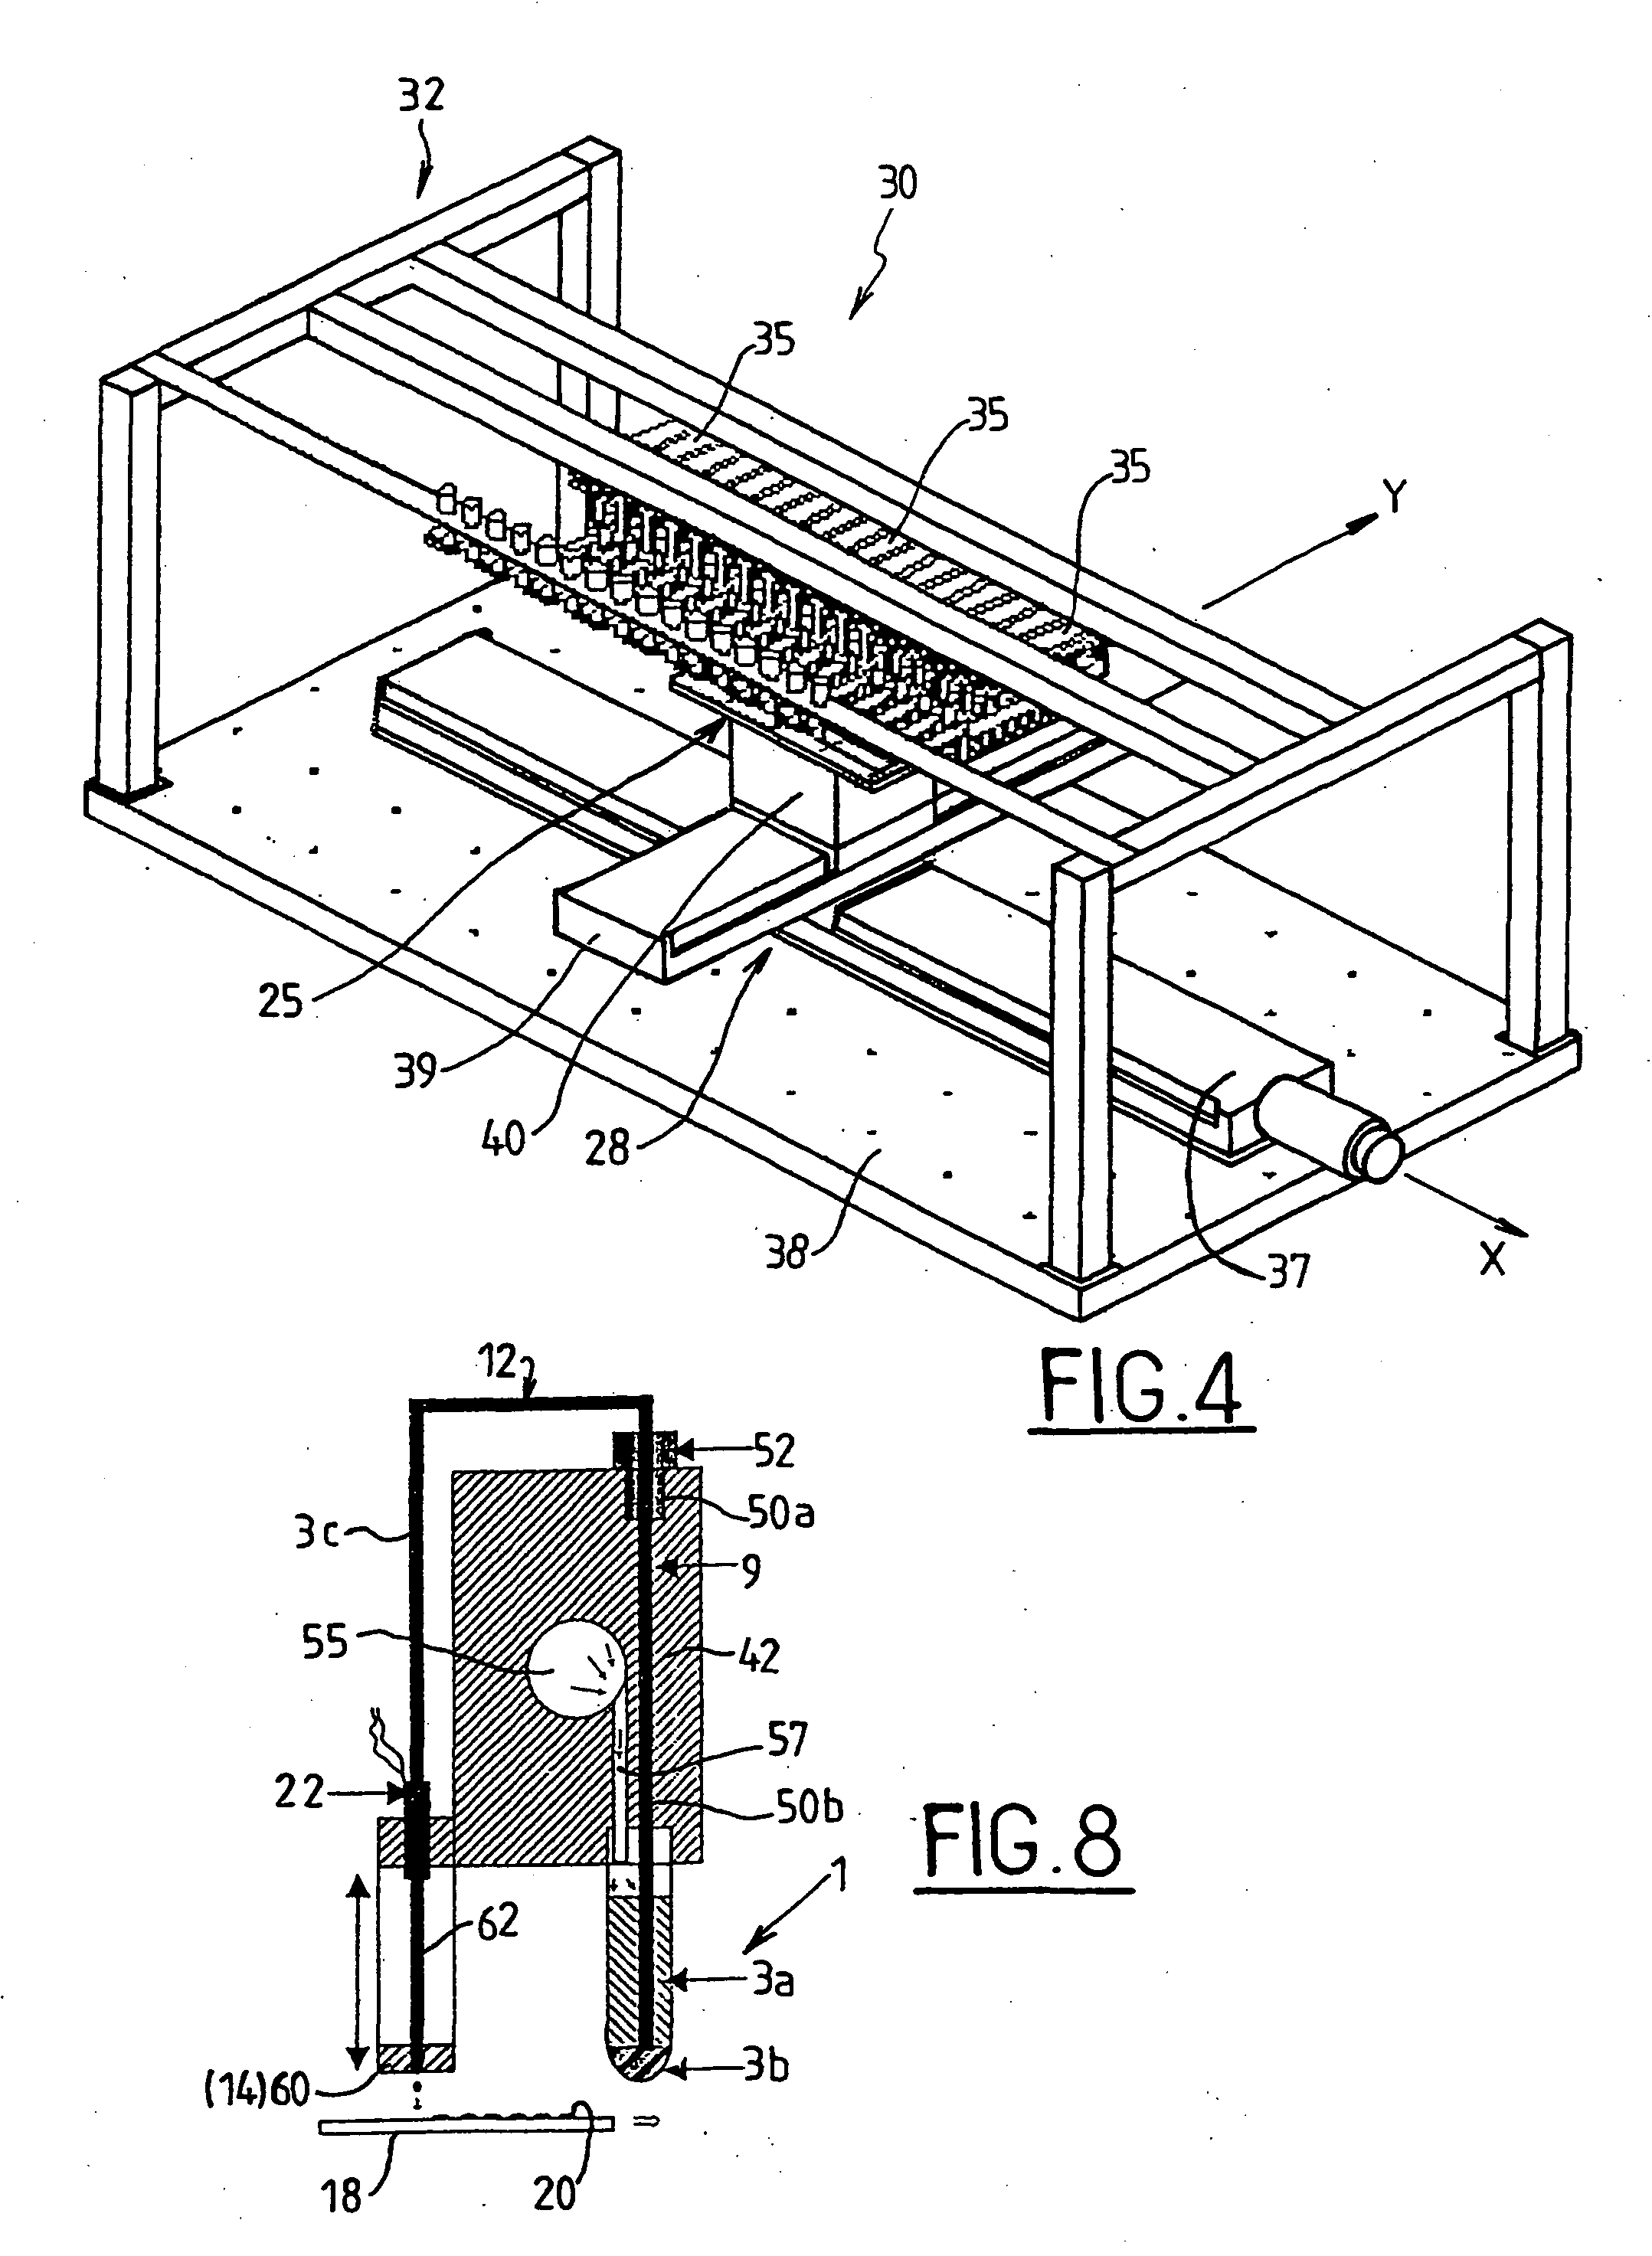 Method and a machine for ex situ fabrication of low and medium integration biochip arrays